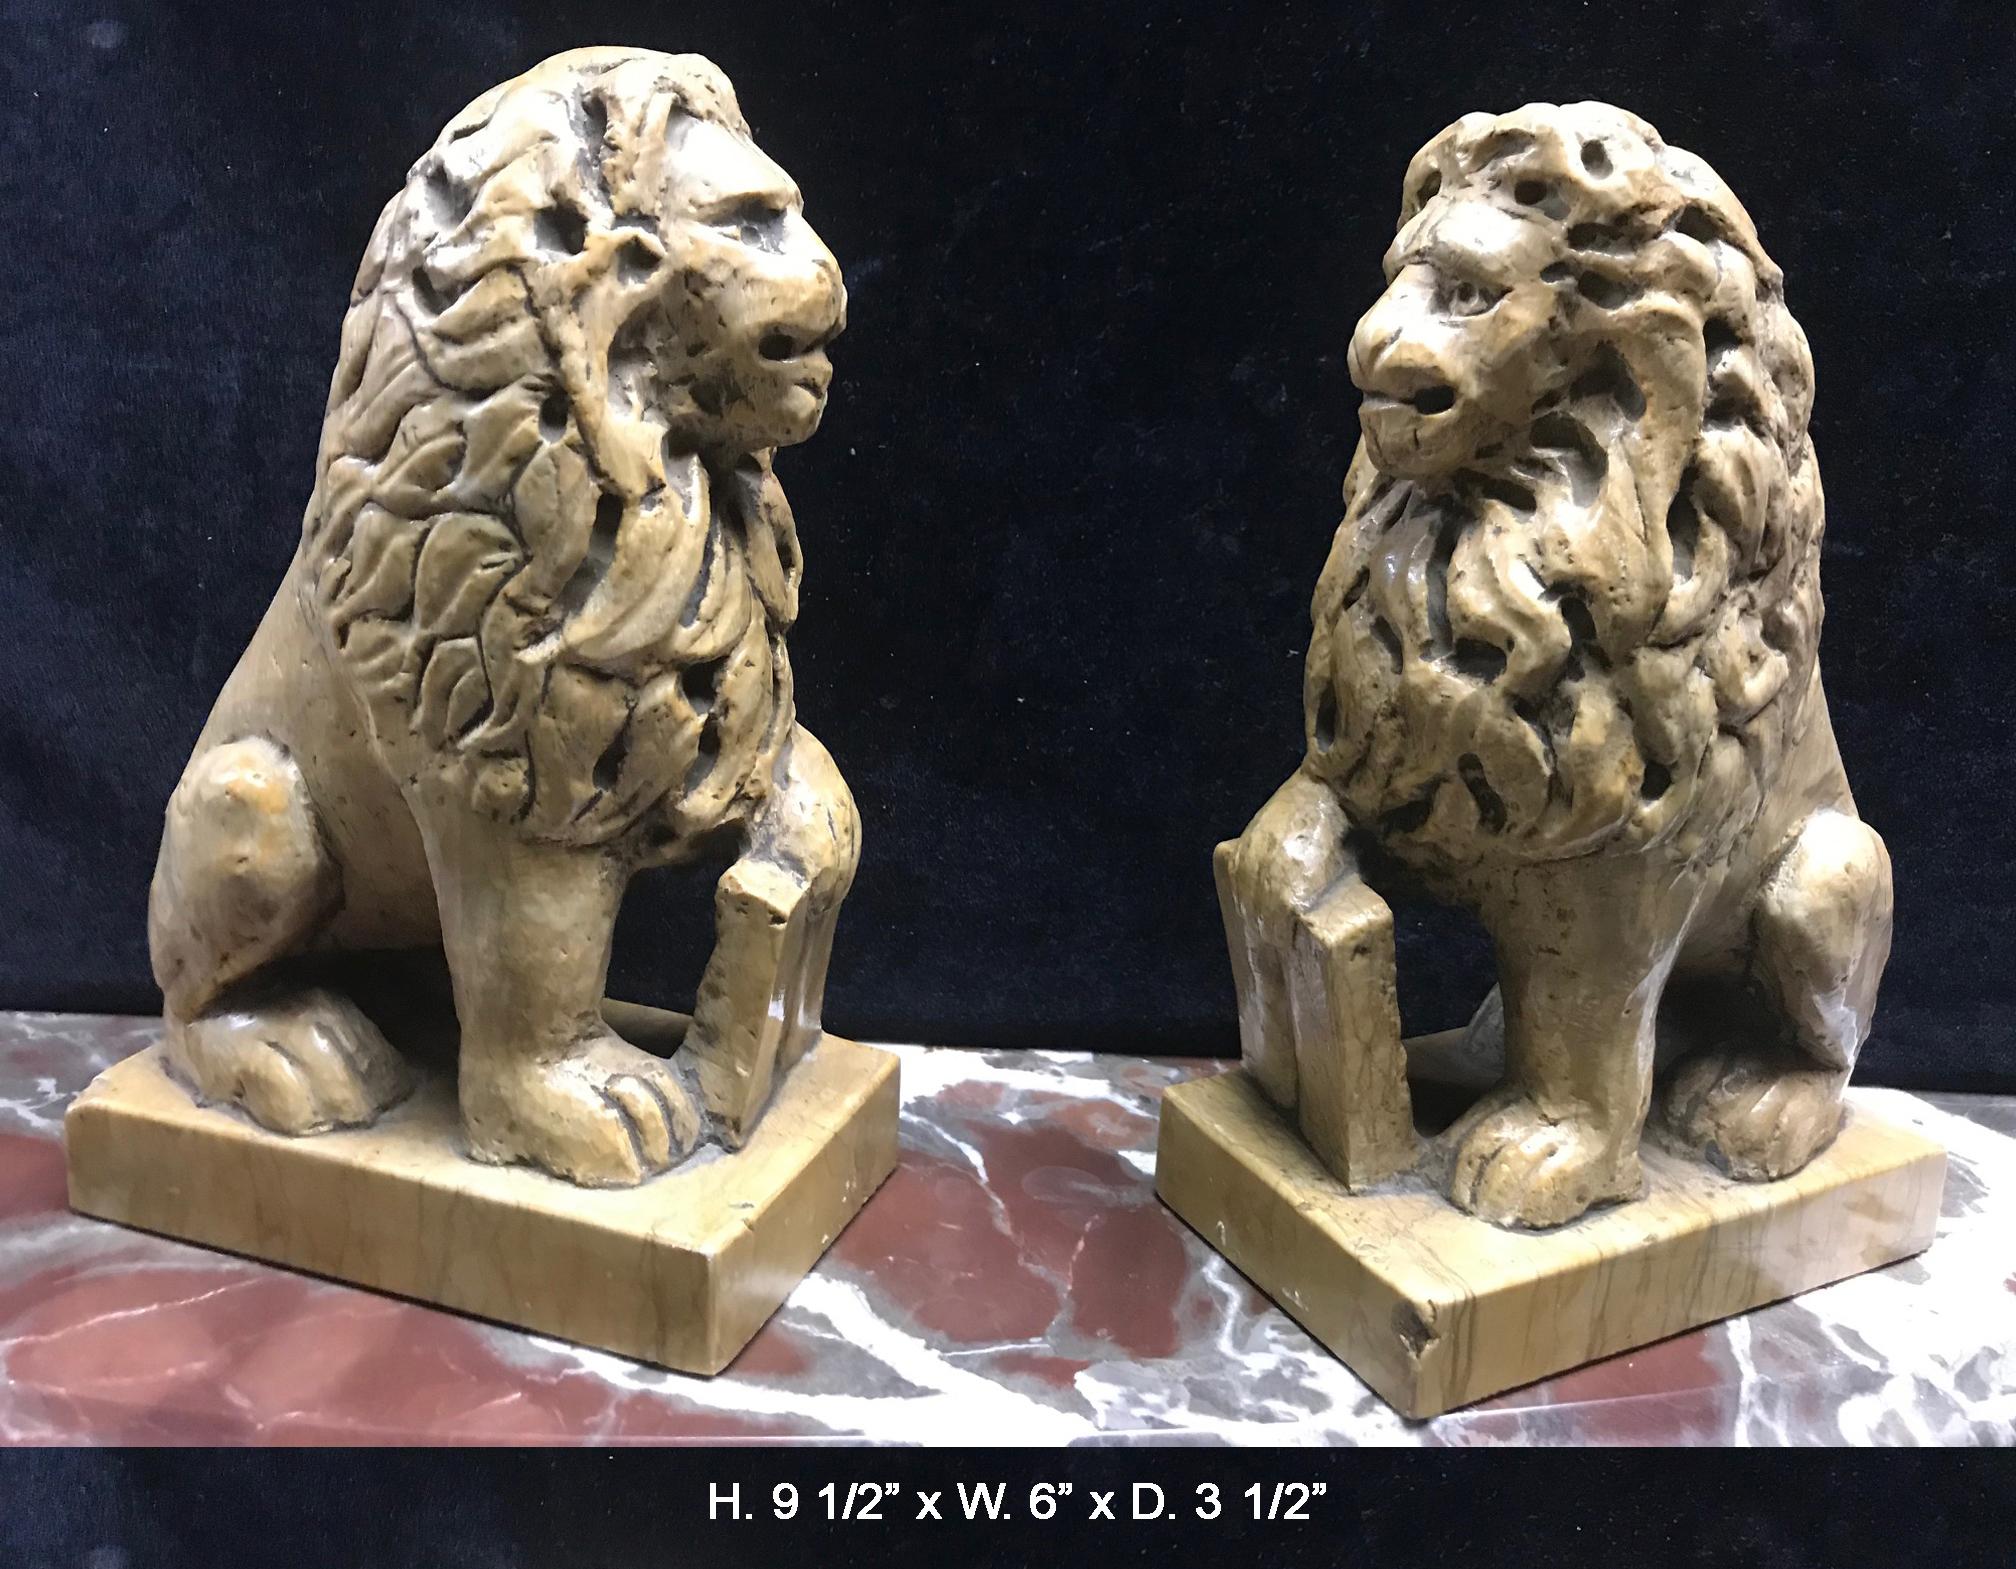 Pretty 19th century pair of Italian finely hand carved sienna marble small opposing lions
The lions would make a great decoration for a desk, table, or even mantel (fireplace).
Measures: H 9 1/2